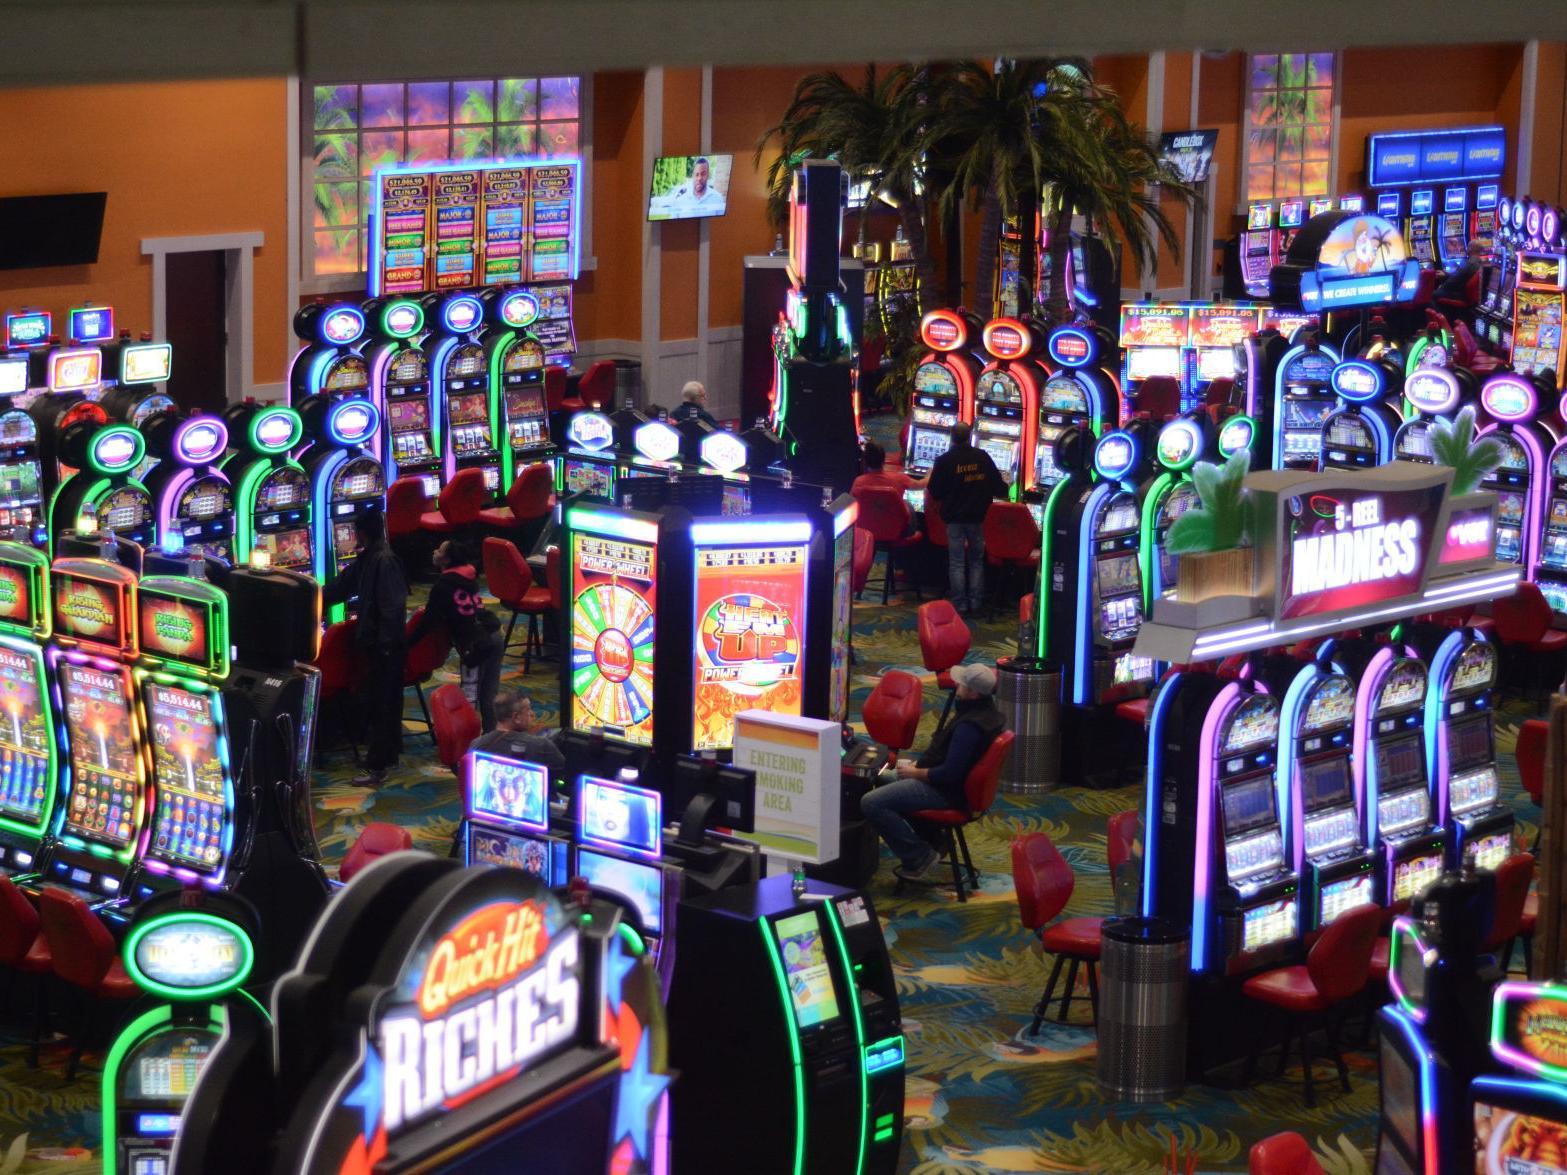 Gaming continues as usual at Oklahoma casinos despite ongoing dispute with state | State and Regional News | tulsaworld.com